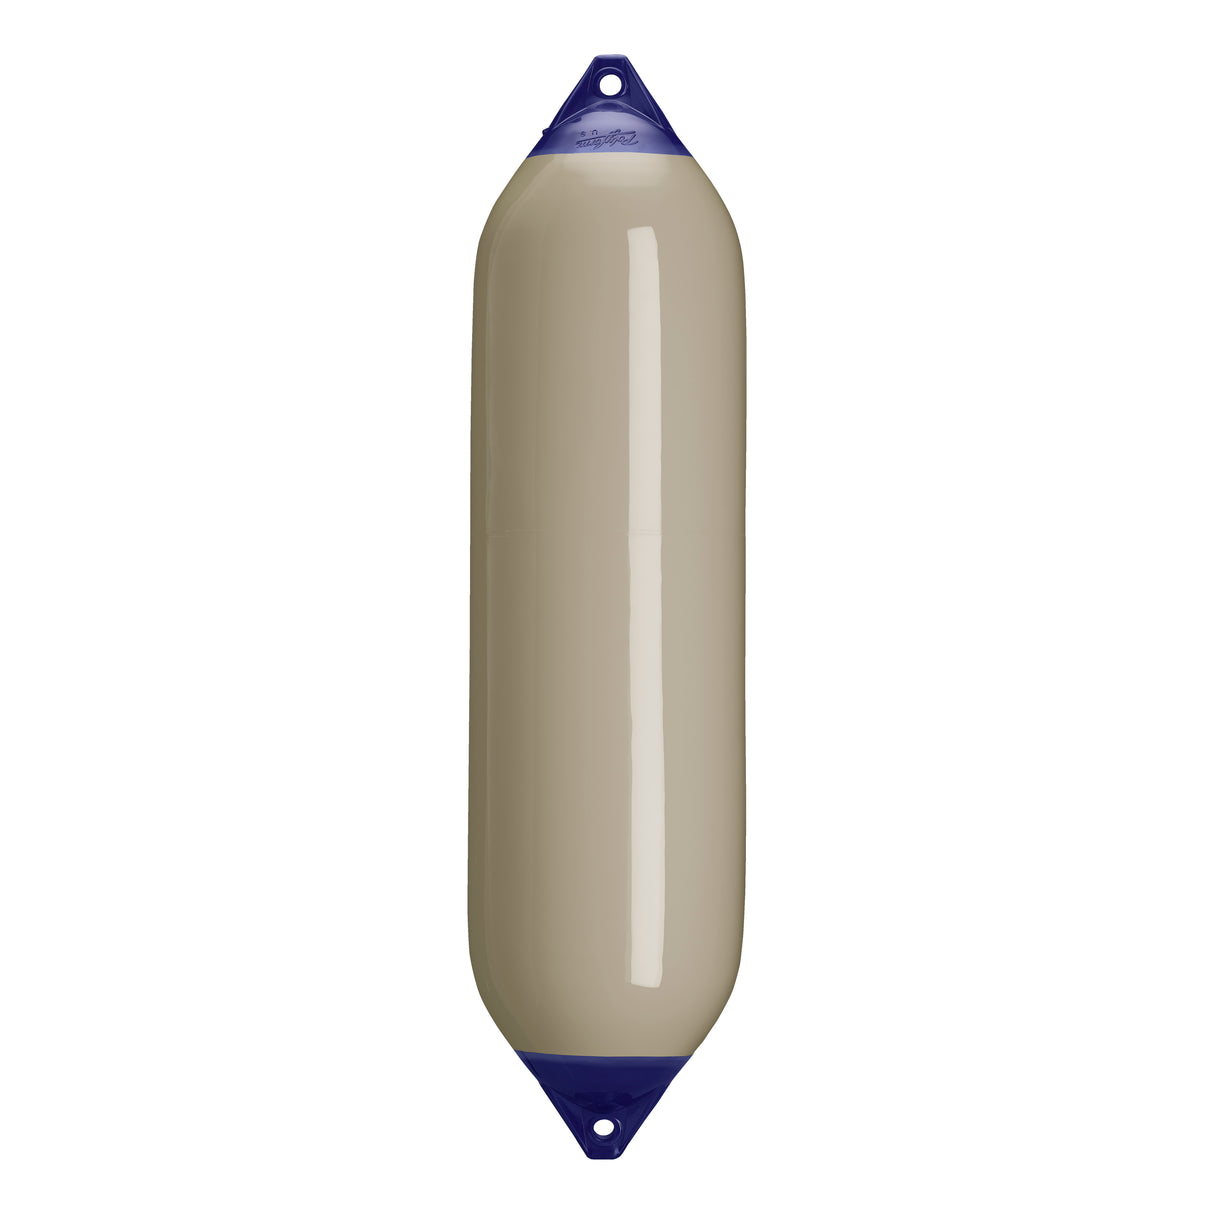 Sand boat fender with Navy-Top, Polyform F-8 